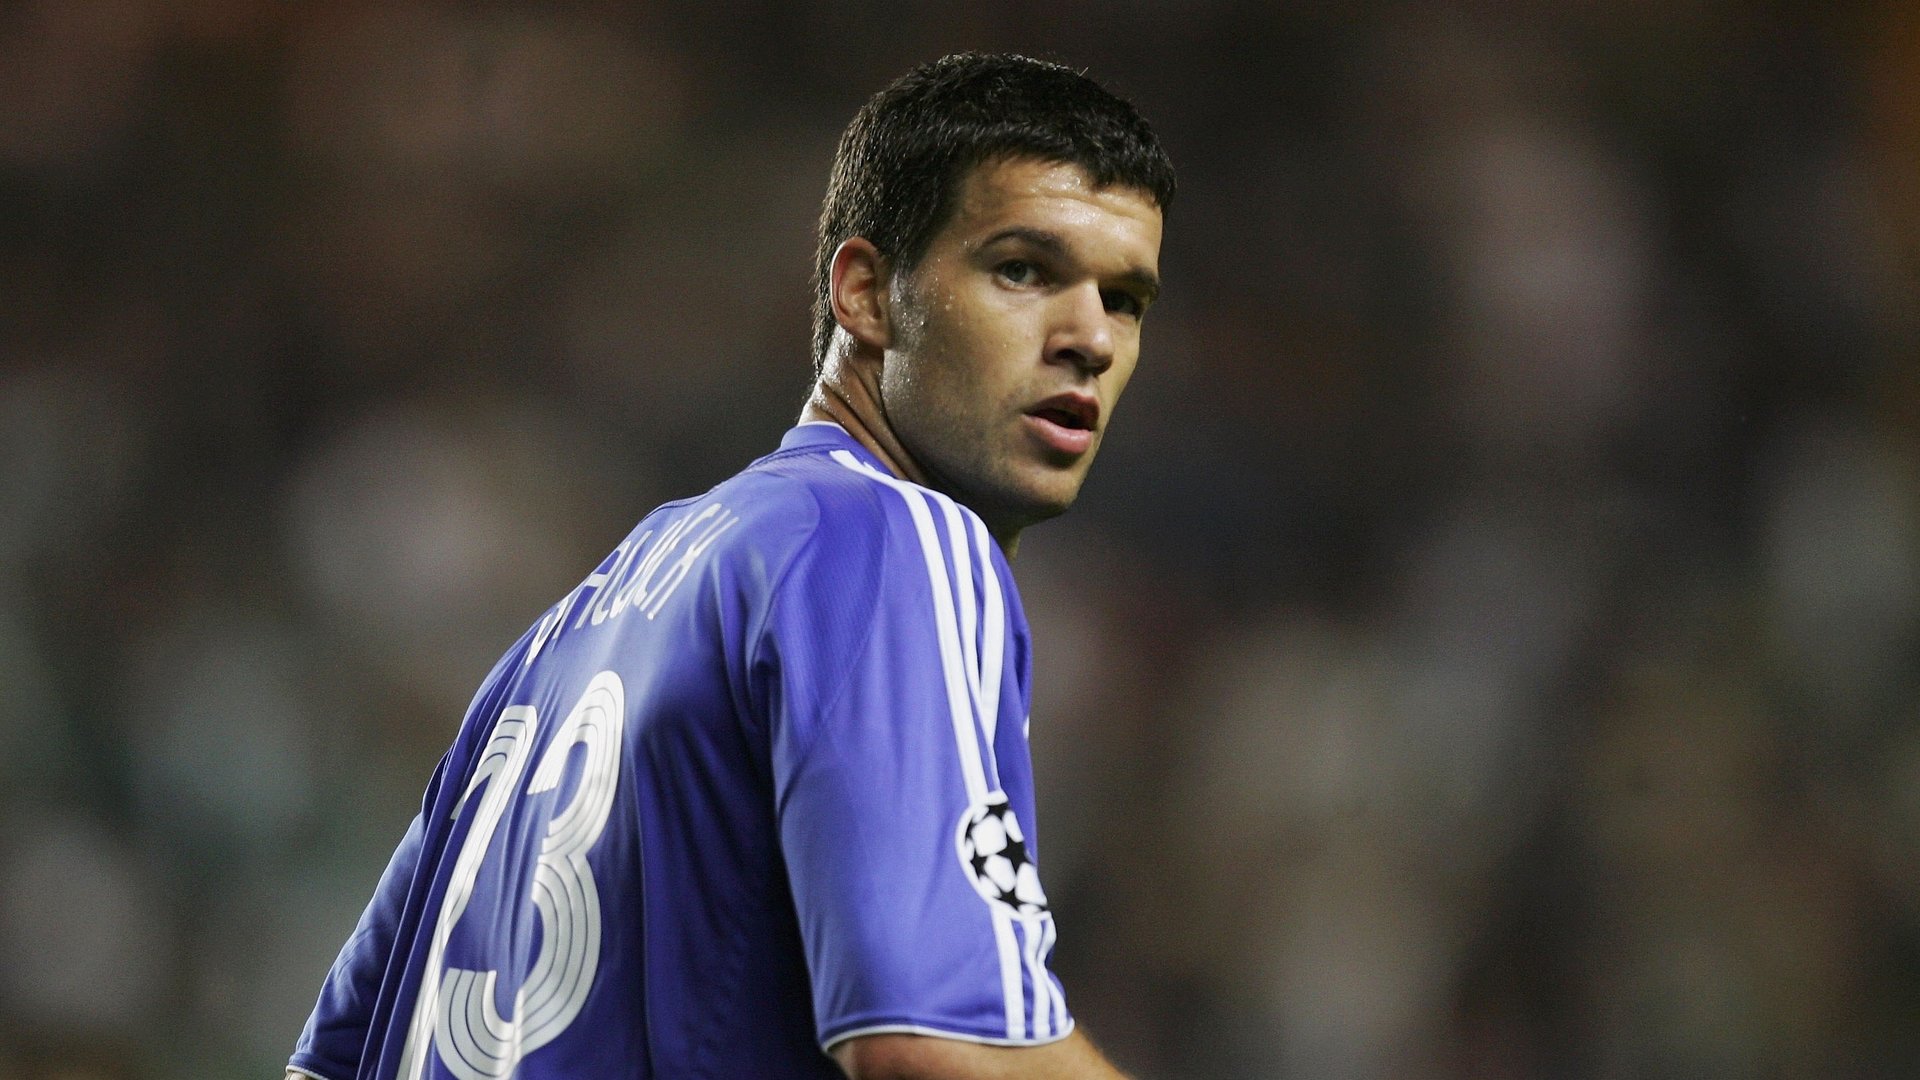 Former Chelsea and Germany midfielder Michael Ballack's son Emilio dies aged 18